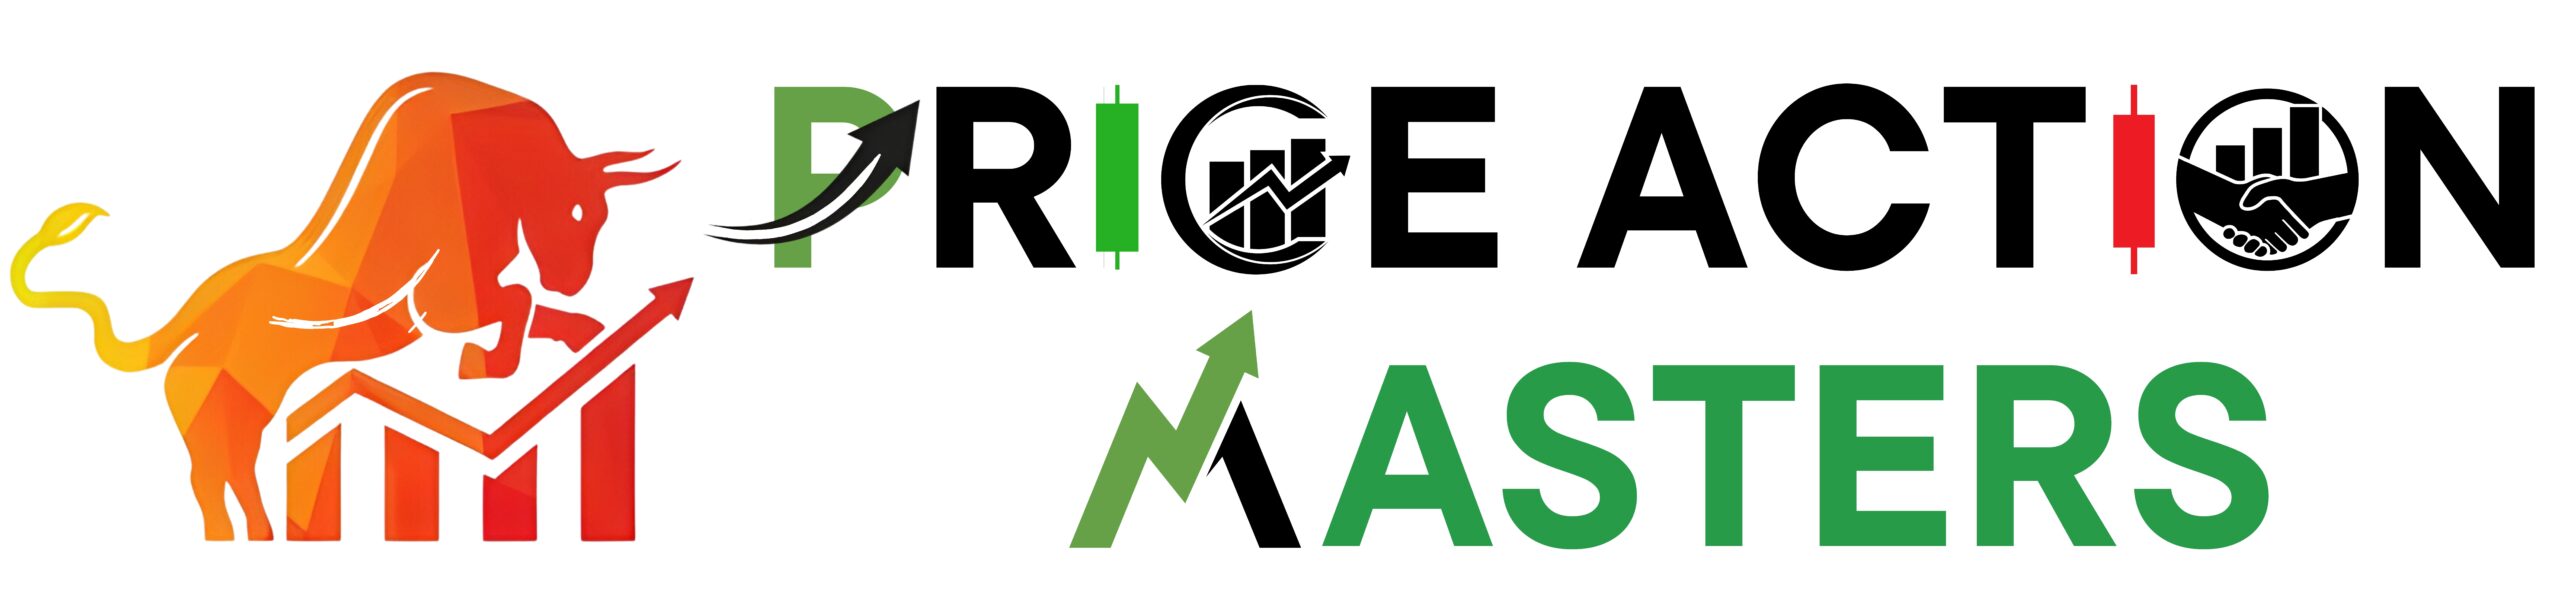 Priceaction Masters